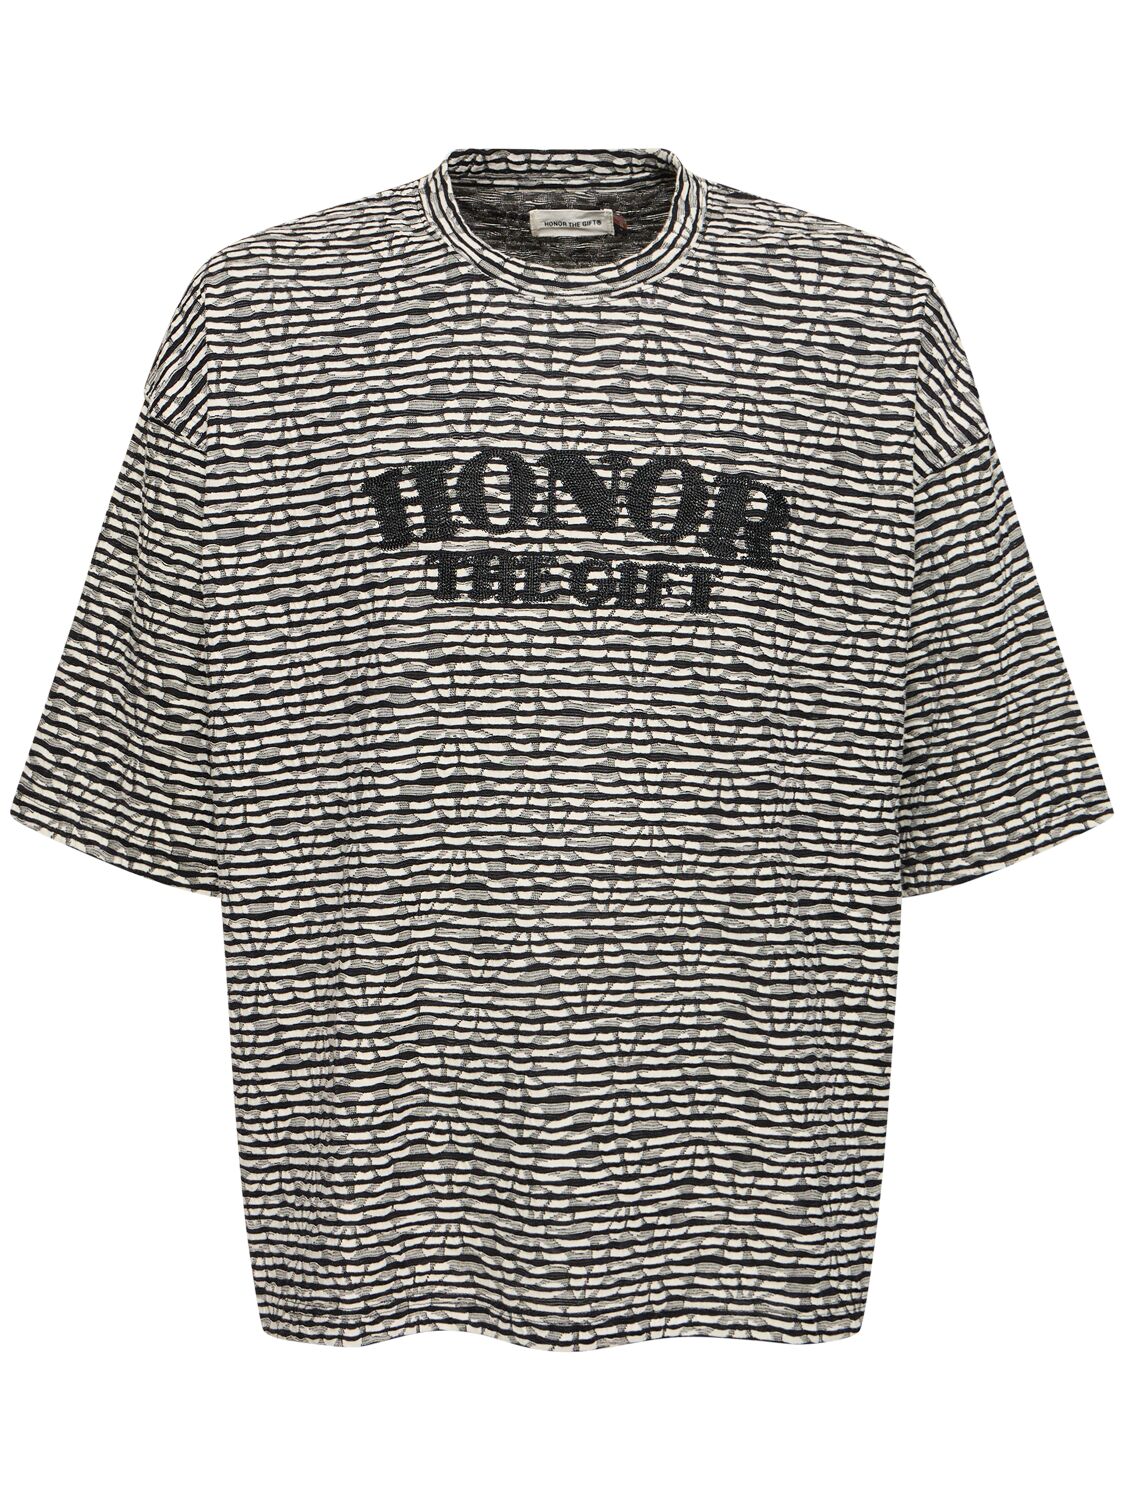 Honor The Gift A-spring Stripe Boxy T-shirt In Black